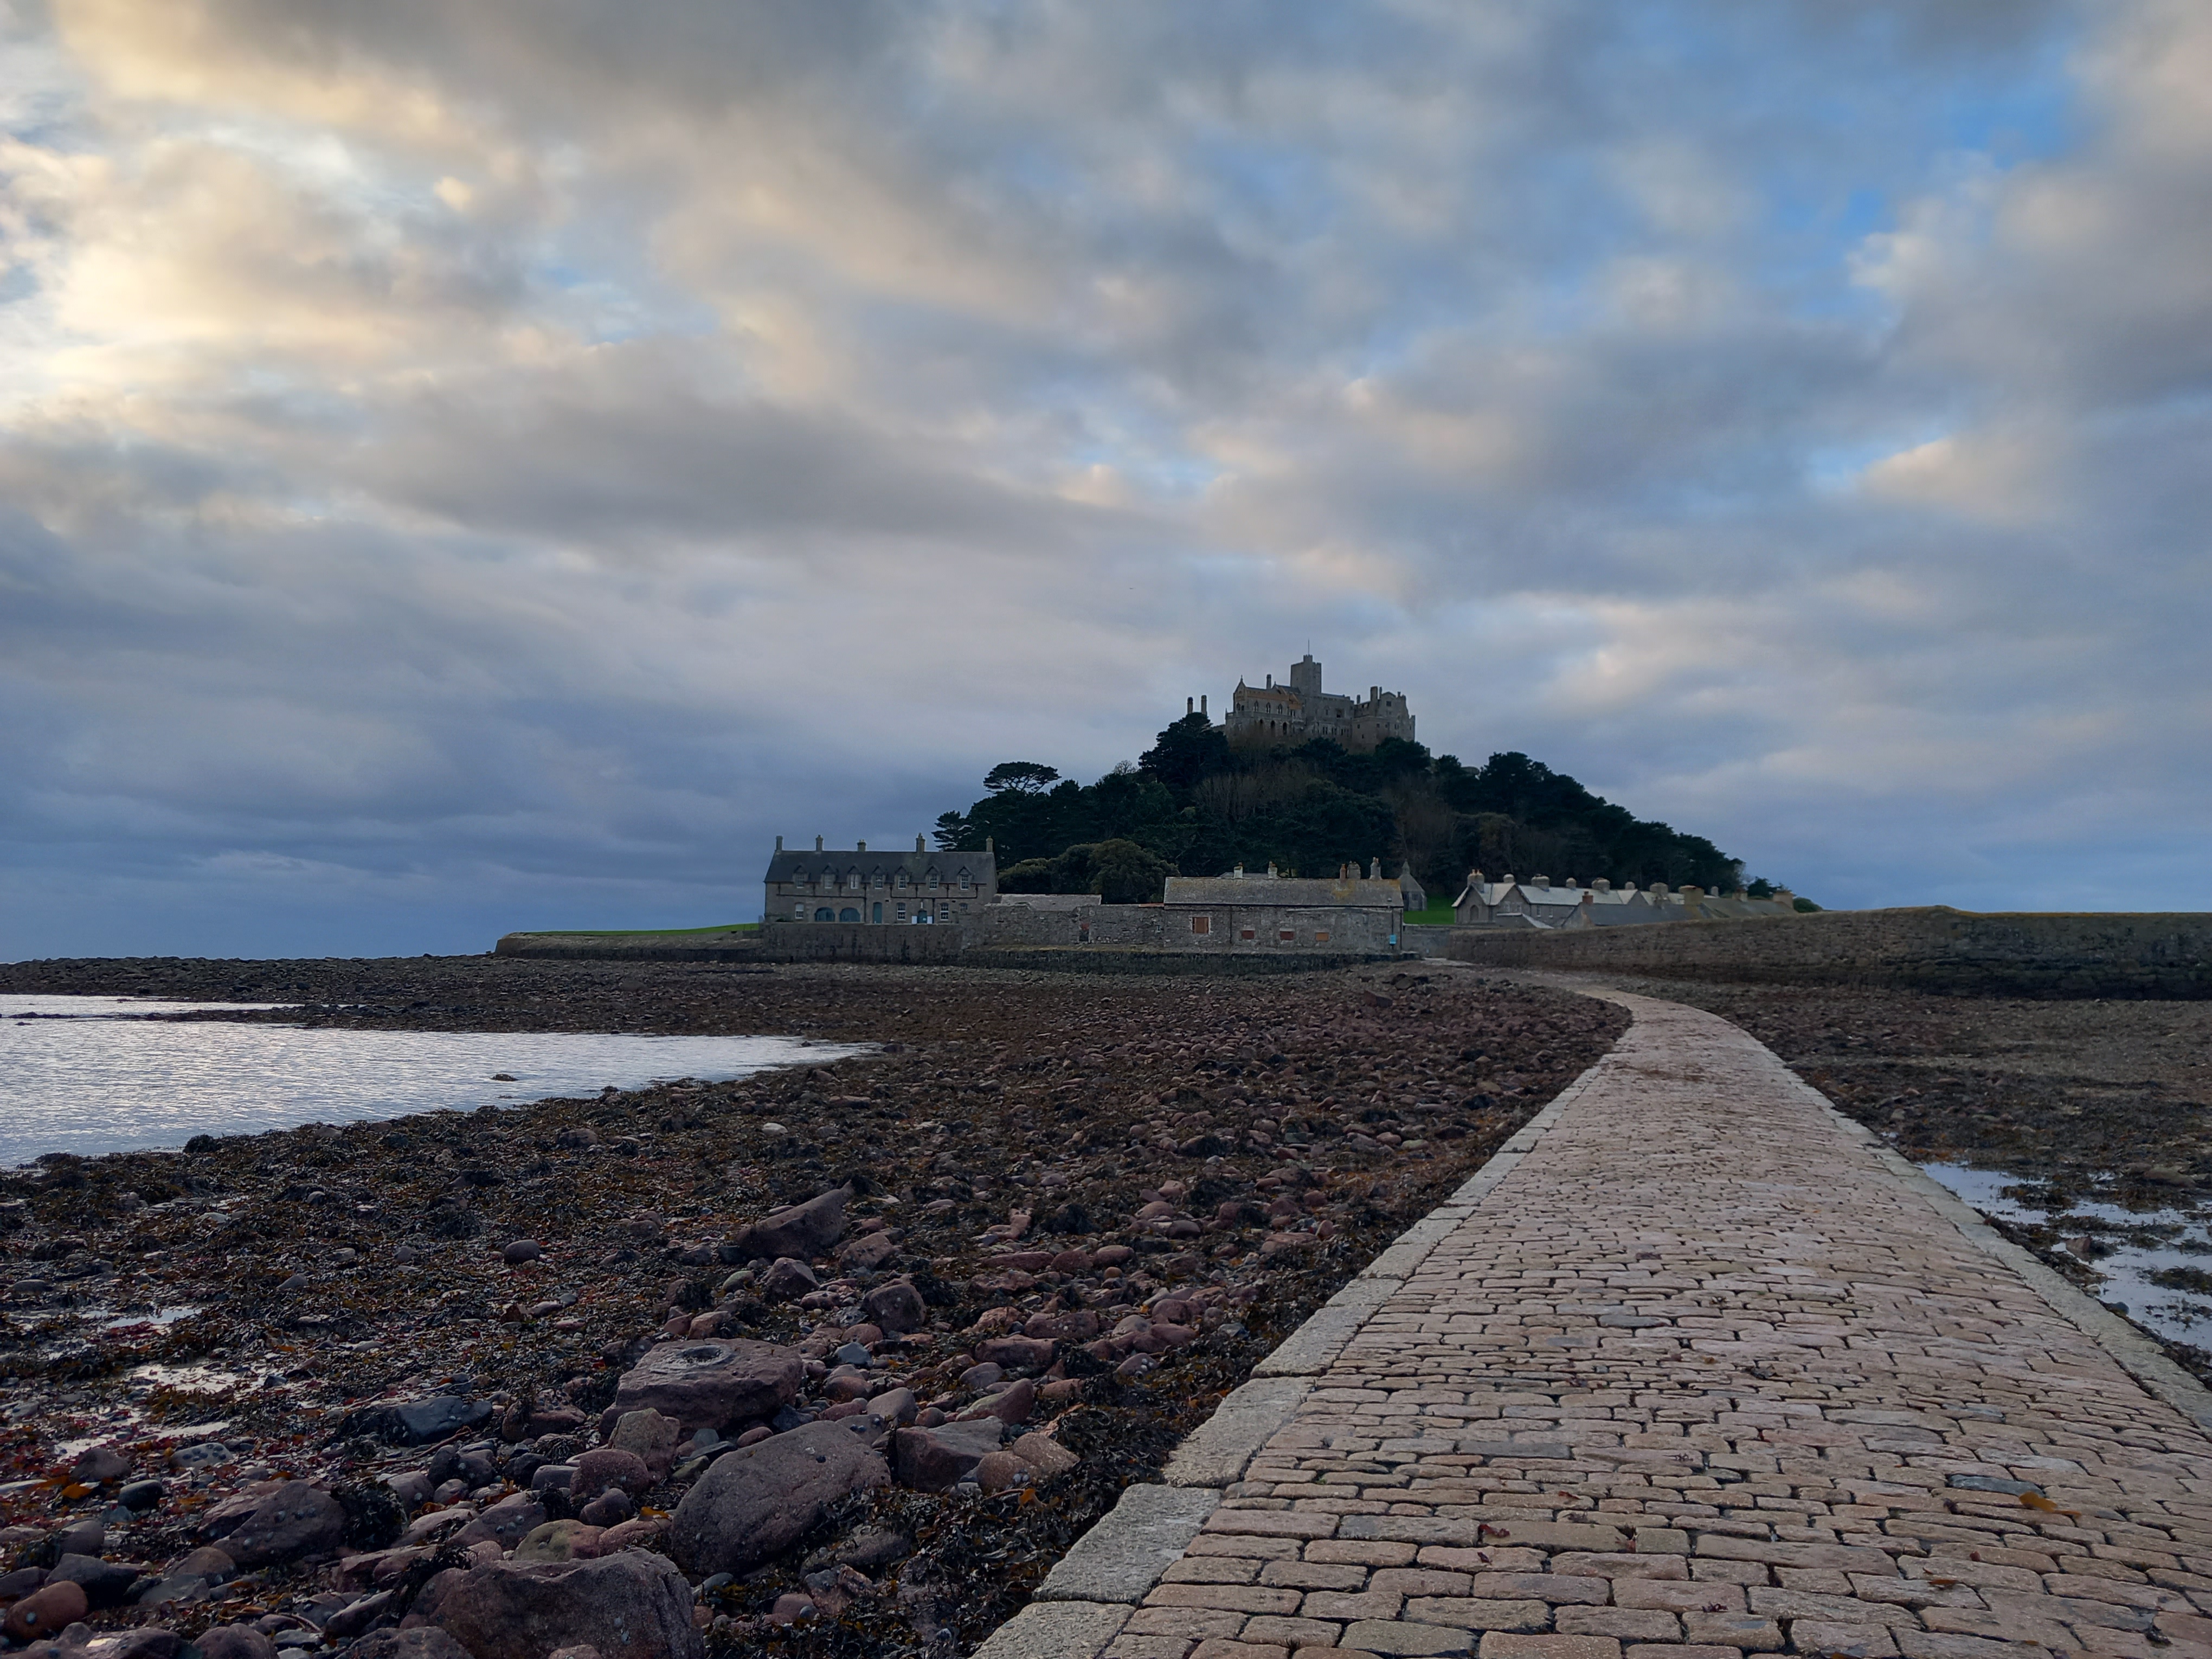 Walking the causeway to St Micheal's Mount